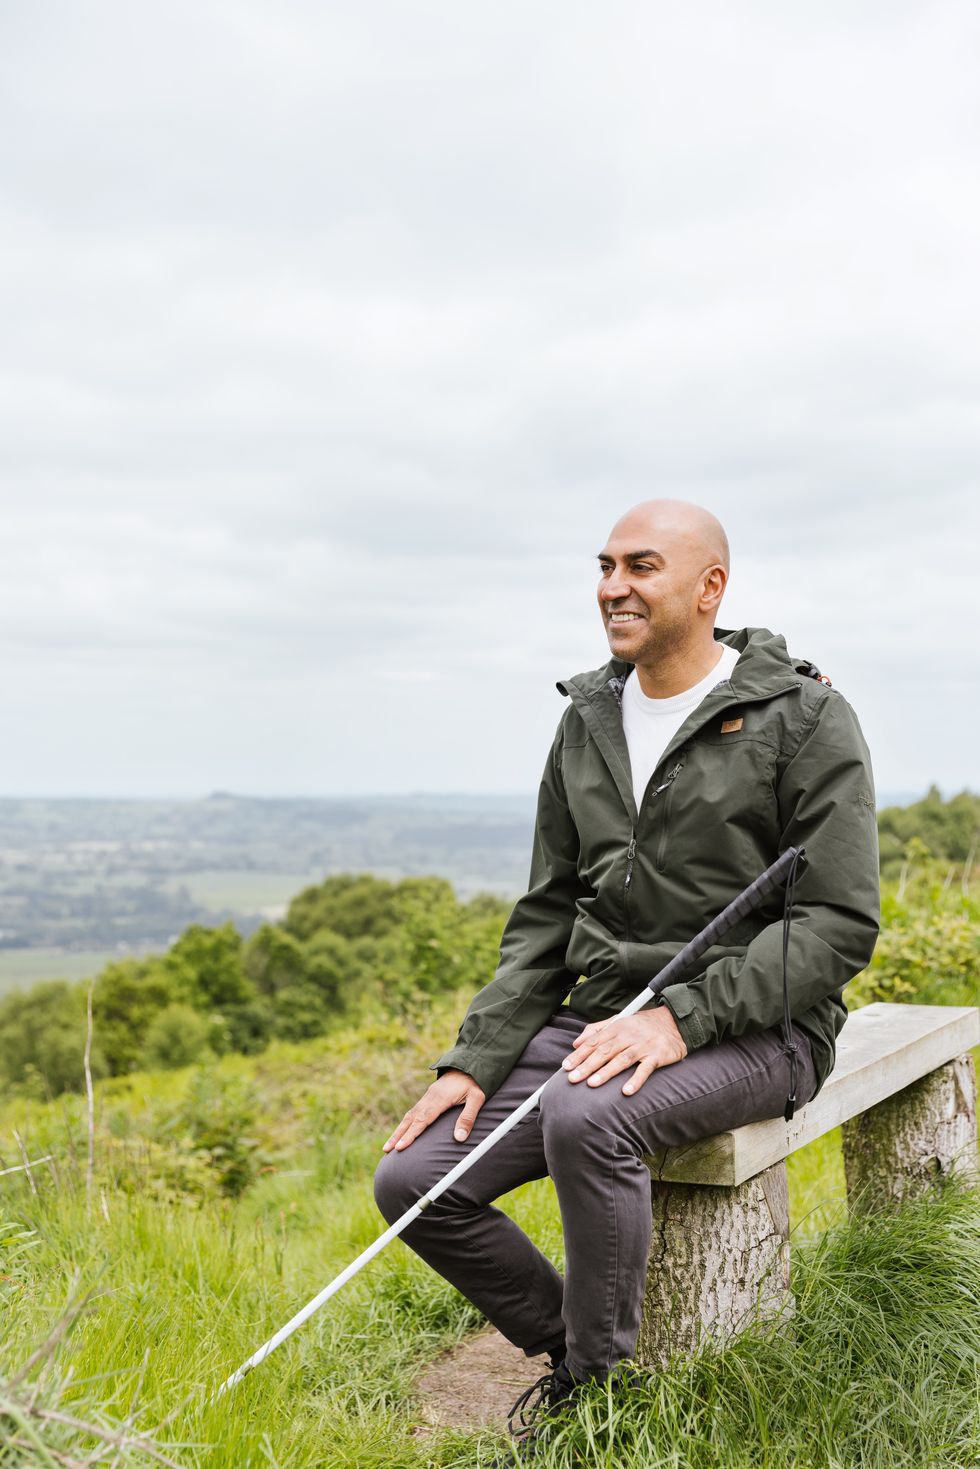 amar latif sitting on a bench in the countryside he is smiling and overlooking the green rolling hills